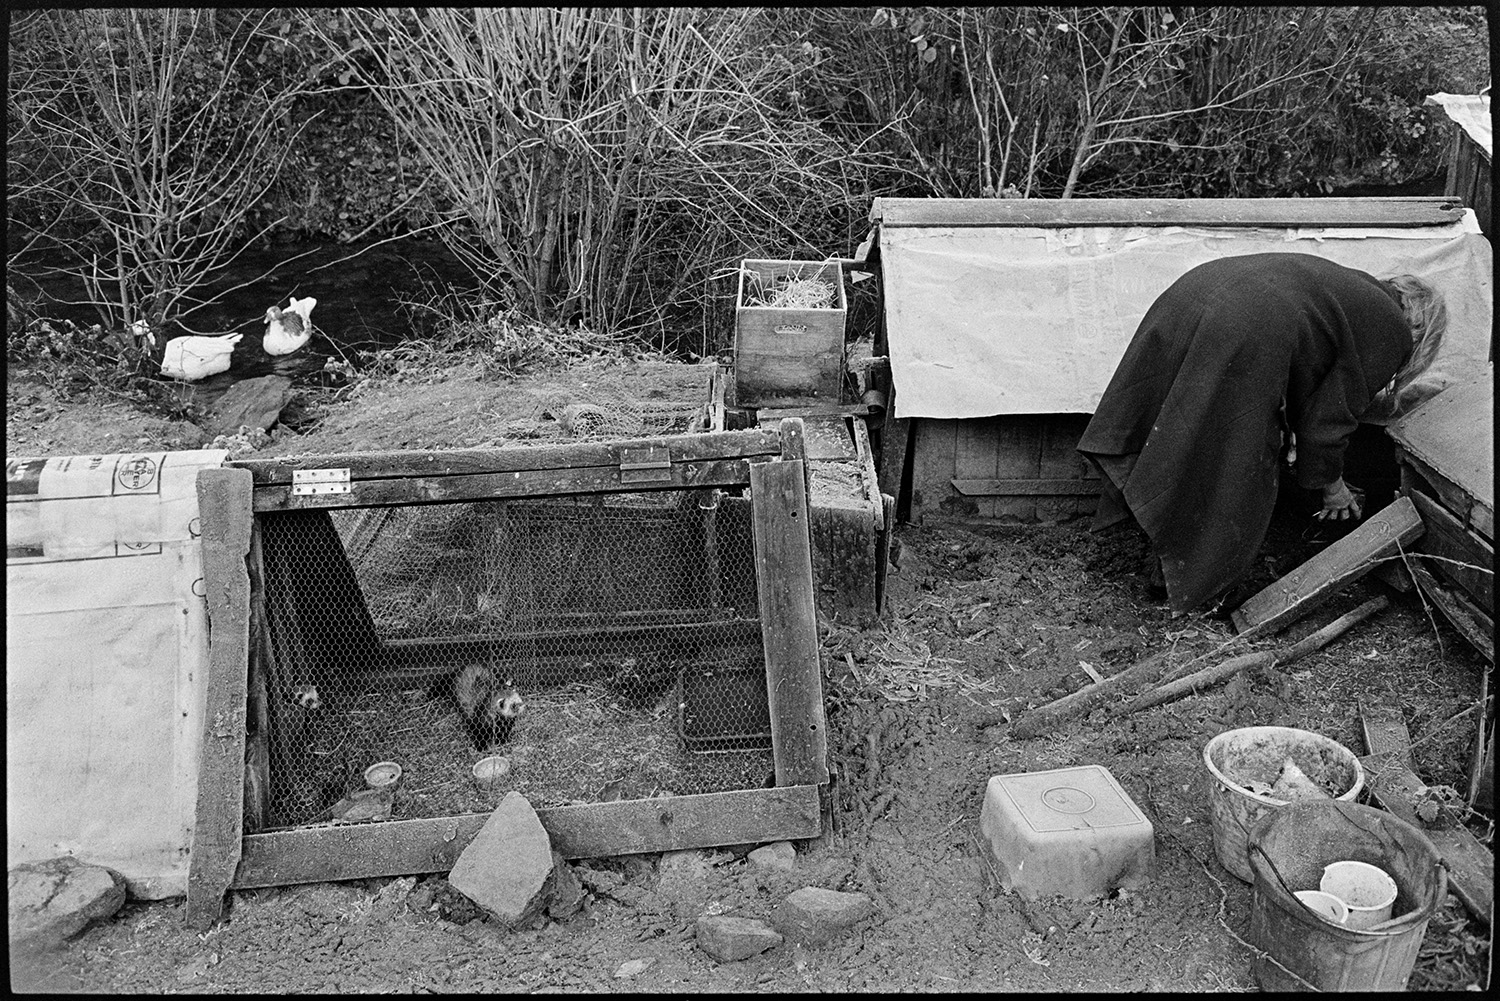 Woman checking chicken coops. 
[Jo Curzon checking chicken coops at Millhams, Dolton. A ferret can be seen in the run in the foreground and two ducks are visible in the stream in the background.]